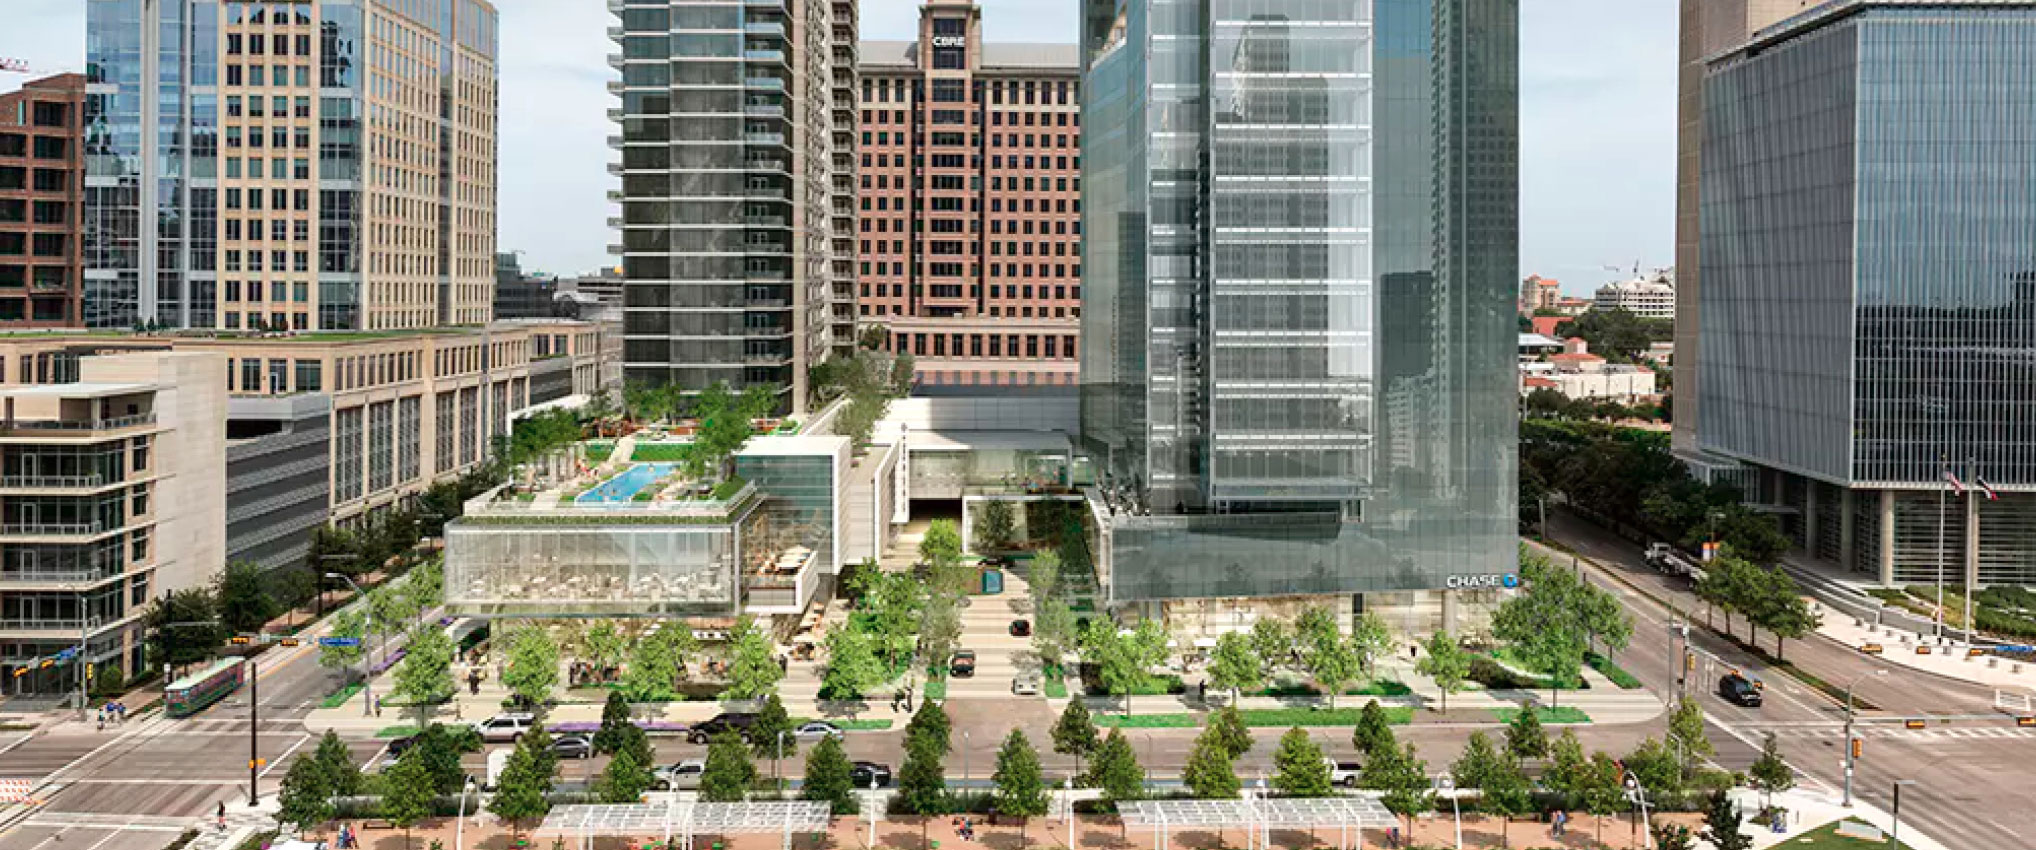 Chicago-Based Law Firm Locates Dallas Office in Park District  High-Rise Complex Designed by HKS